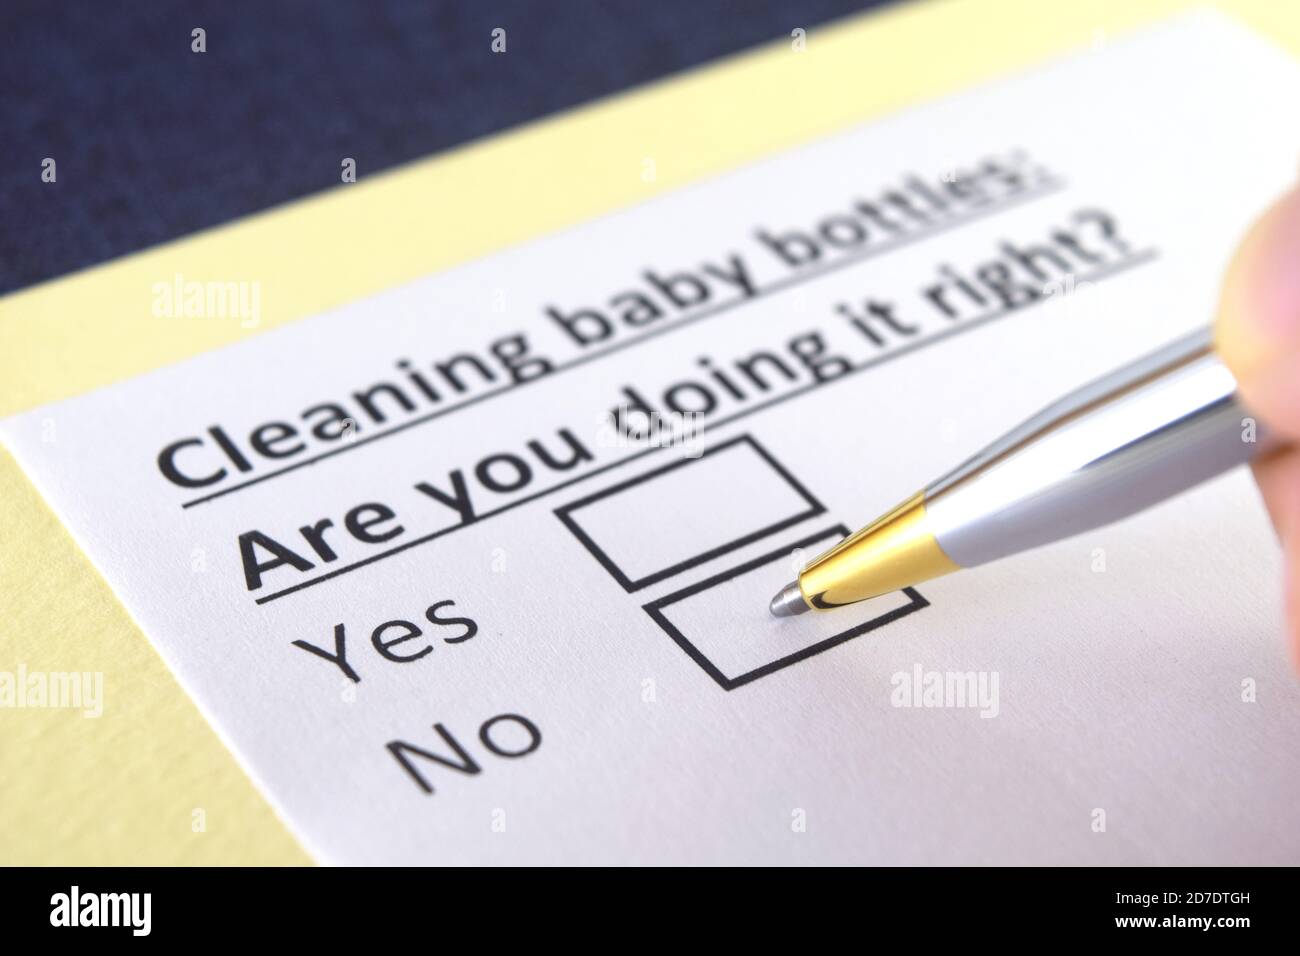 One person is answering question about cleaning baby bottles. Stock Photo